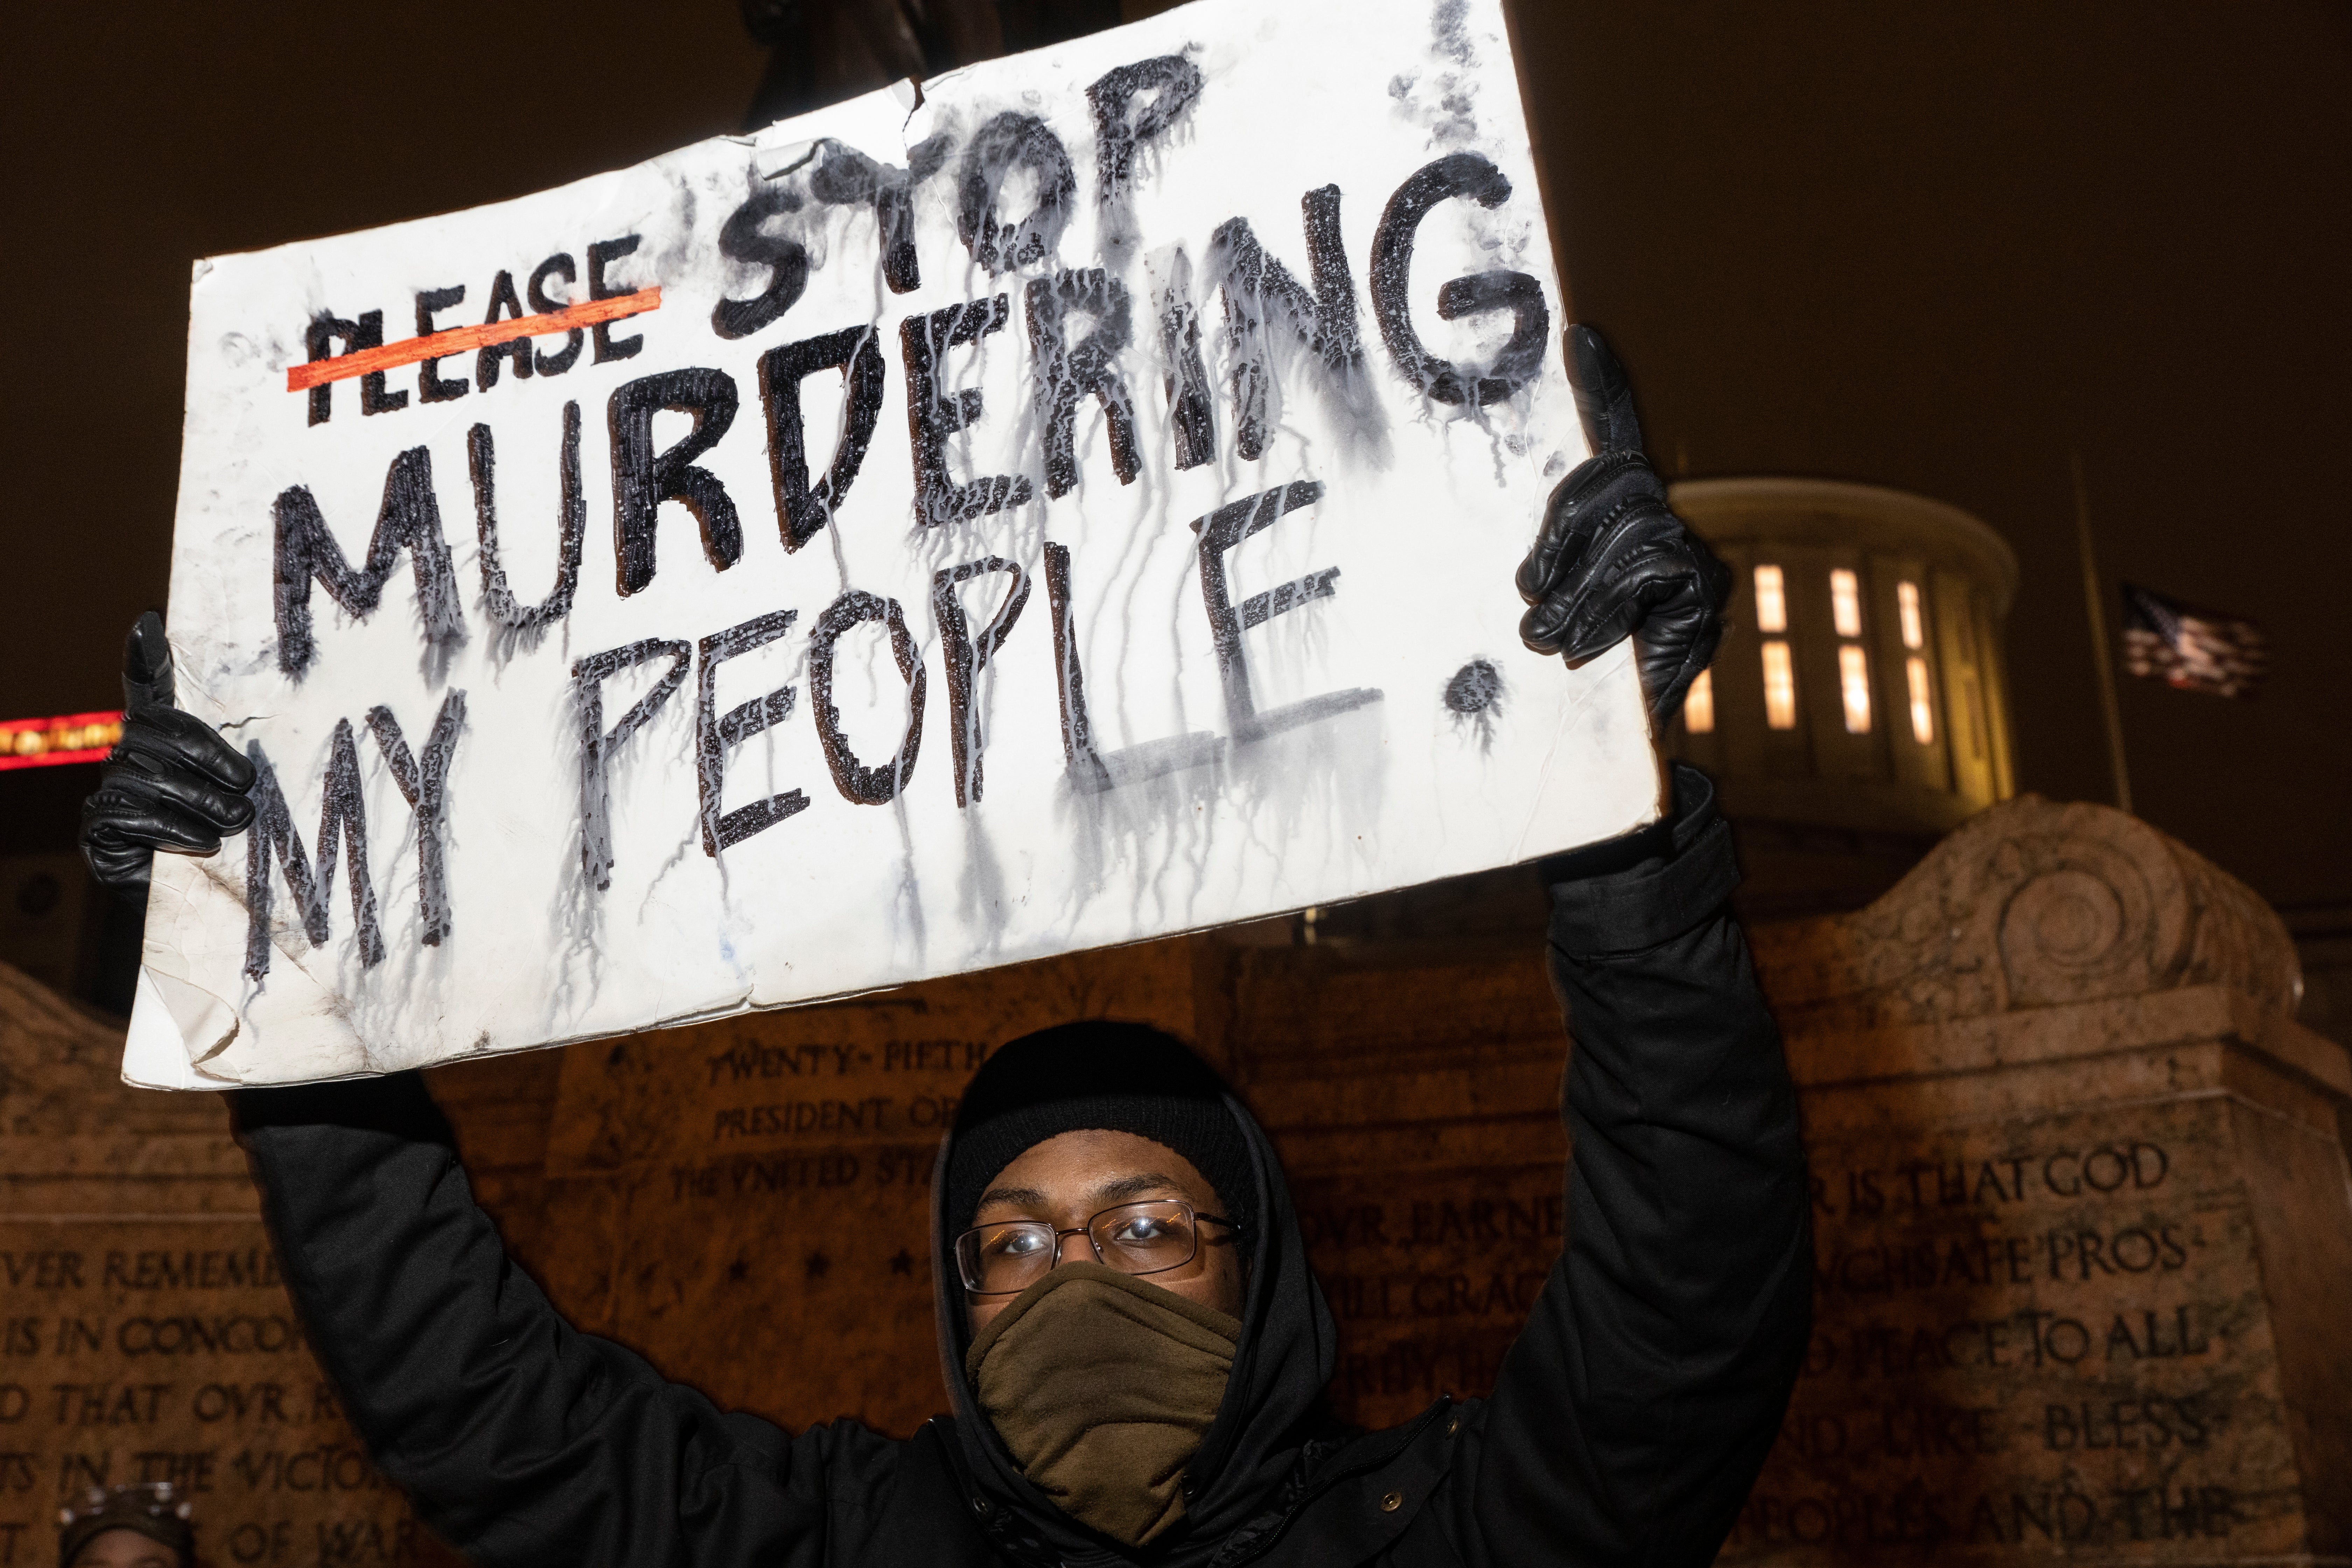 <p>A Black Lives Matter activist holds a sign against police brutality in front of the Ohio Statehouse in reaction to the shooting of Makiyah Bryant on April 20, 2021 in Columbus, Ohio. Columbus Police Shot and killed Makiyah Bryant, 16 years old, on April 20, 2021 sparking outrage from the community.</p>